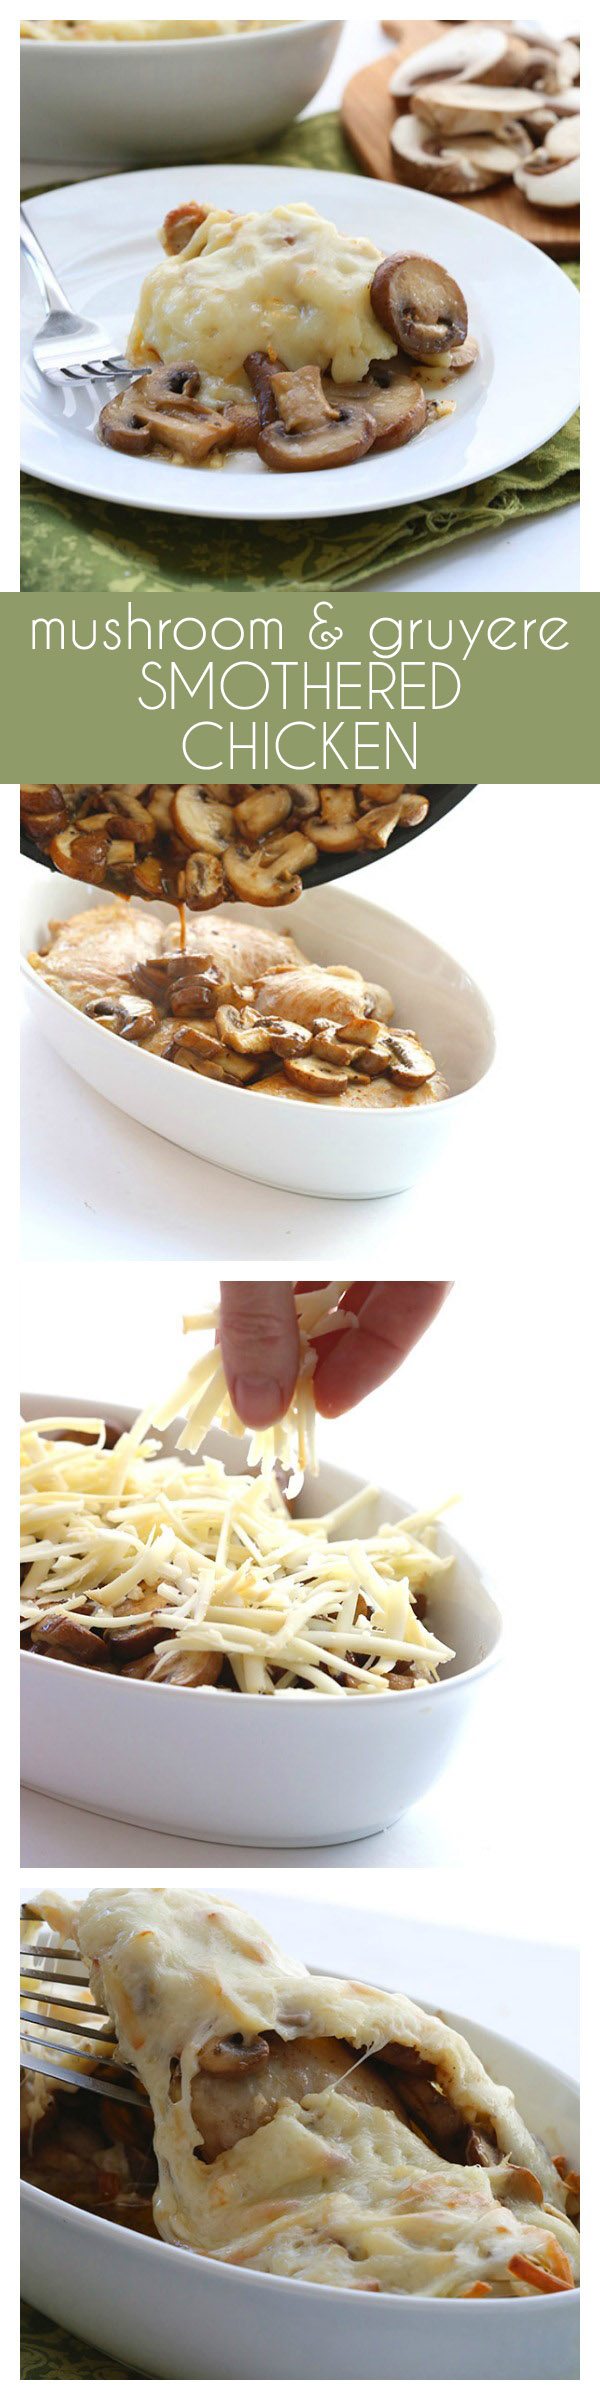 The best low carb dinner recipe! Browned chicken thighs smothered in sautéed mushrooms and cheese and baked to perfection.